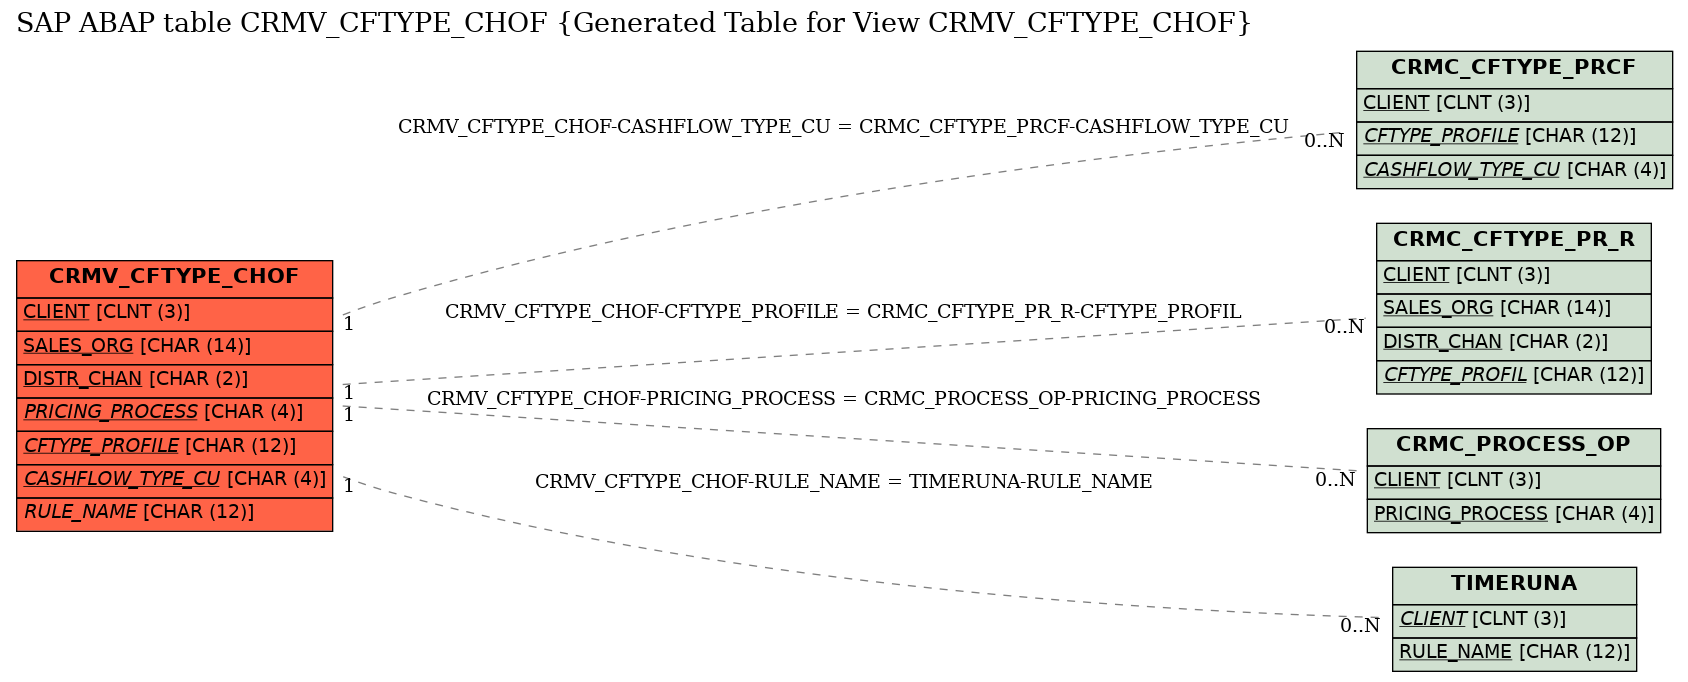 E-R Diagram for table CRMV_CFTYPE_CHOF (Generated Table for View CRMV_CFTYPE_CHOF)